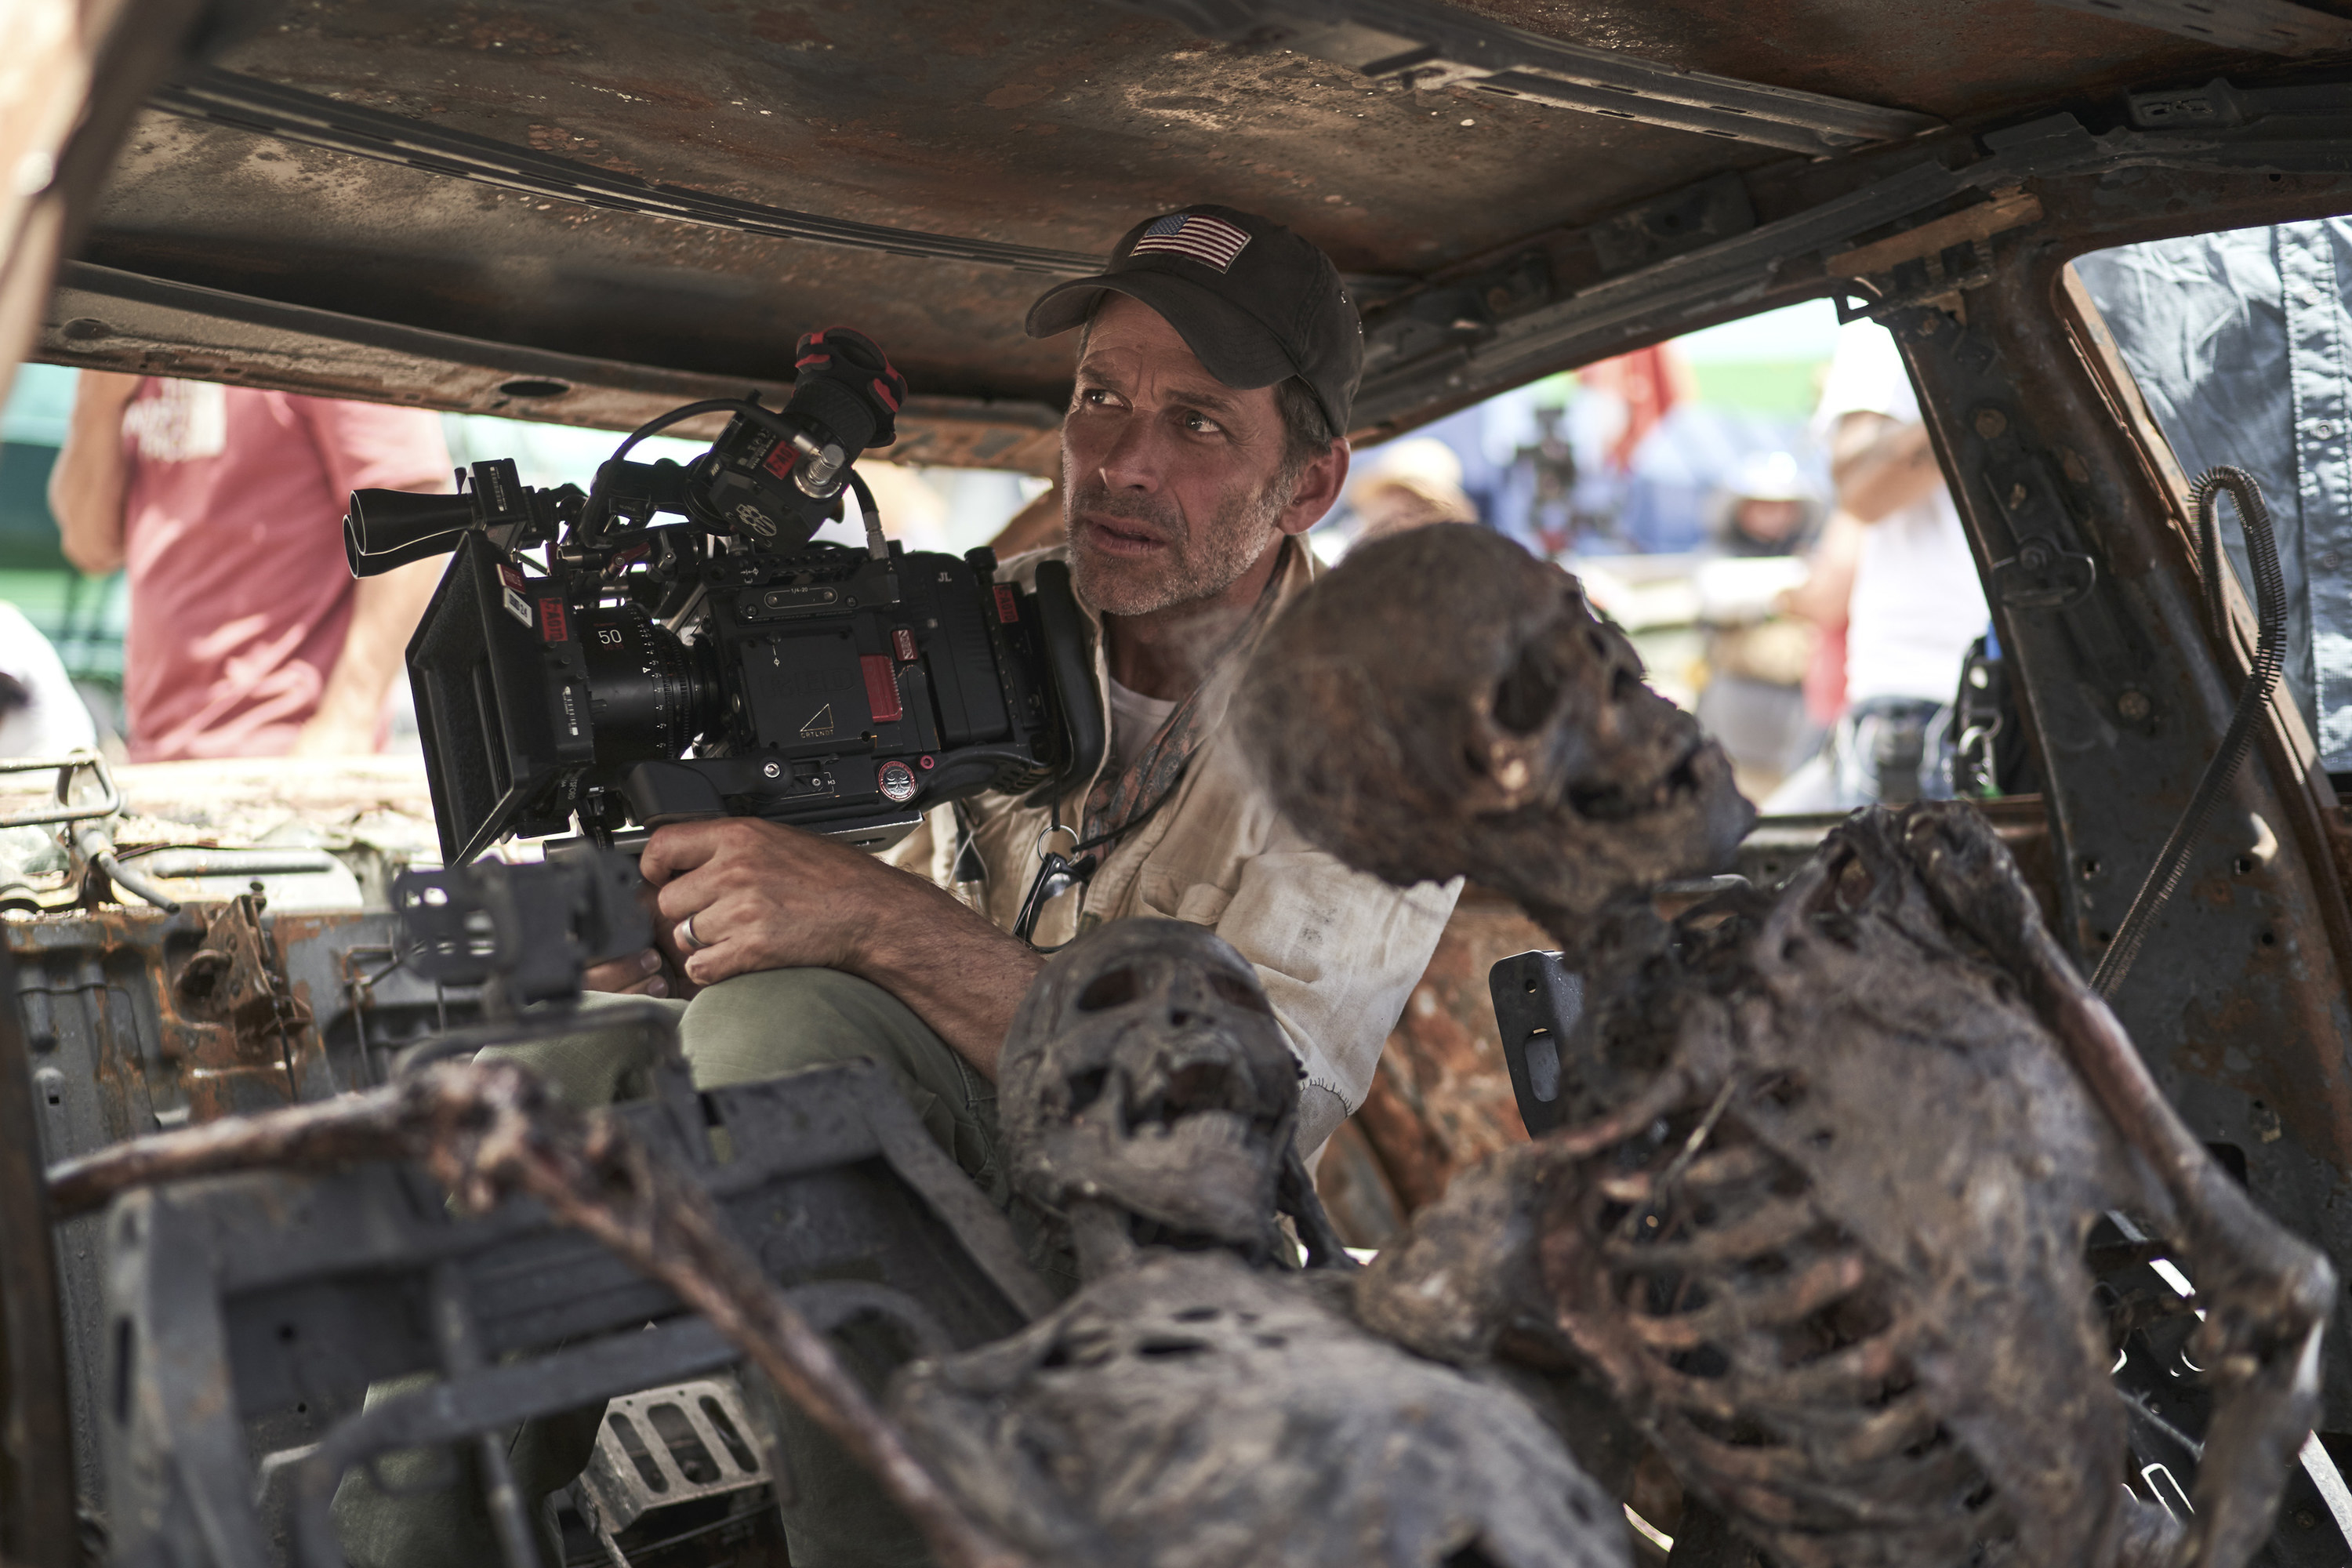 Zack sitting inside a car with a skeleton as he shoots a scene